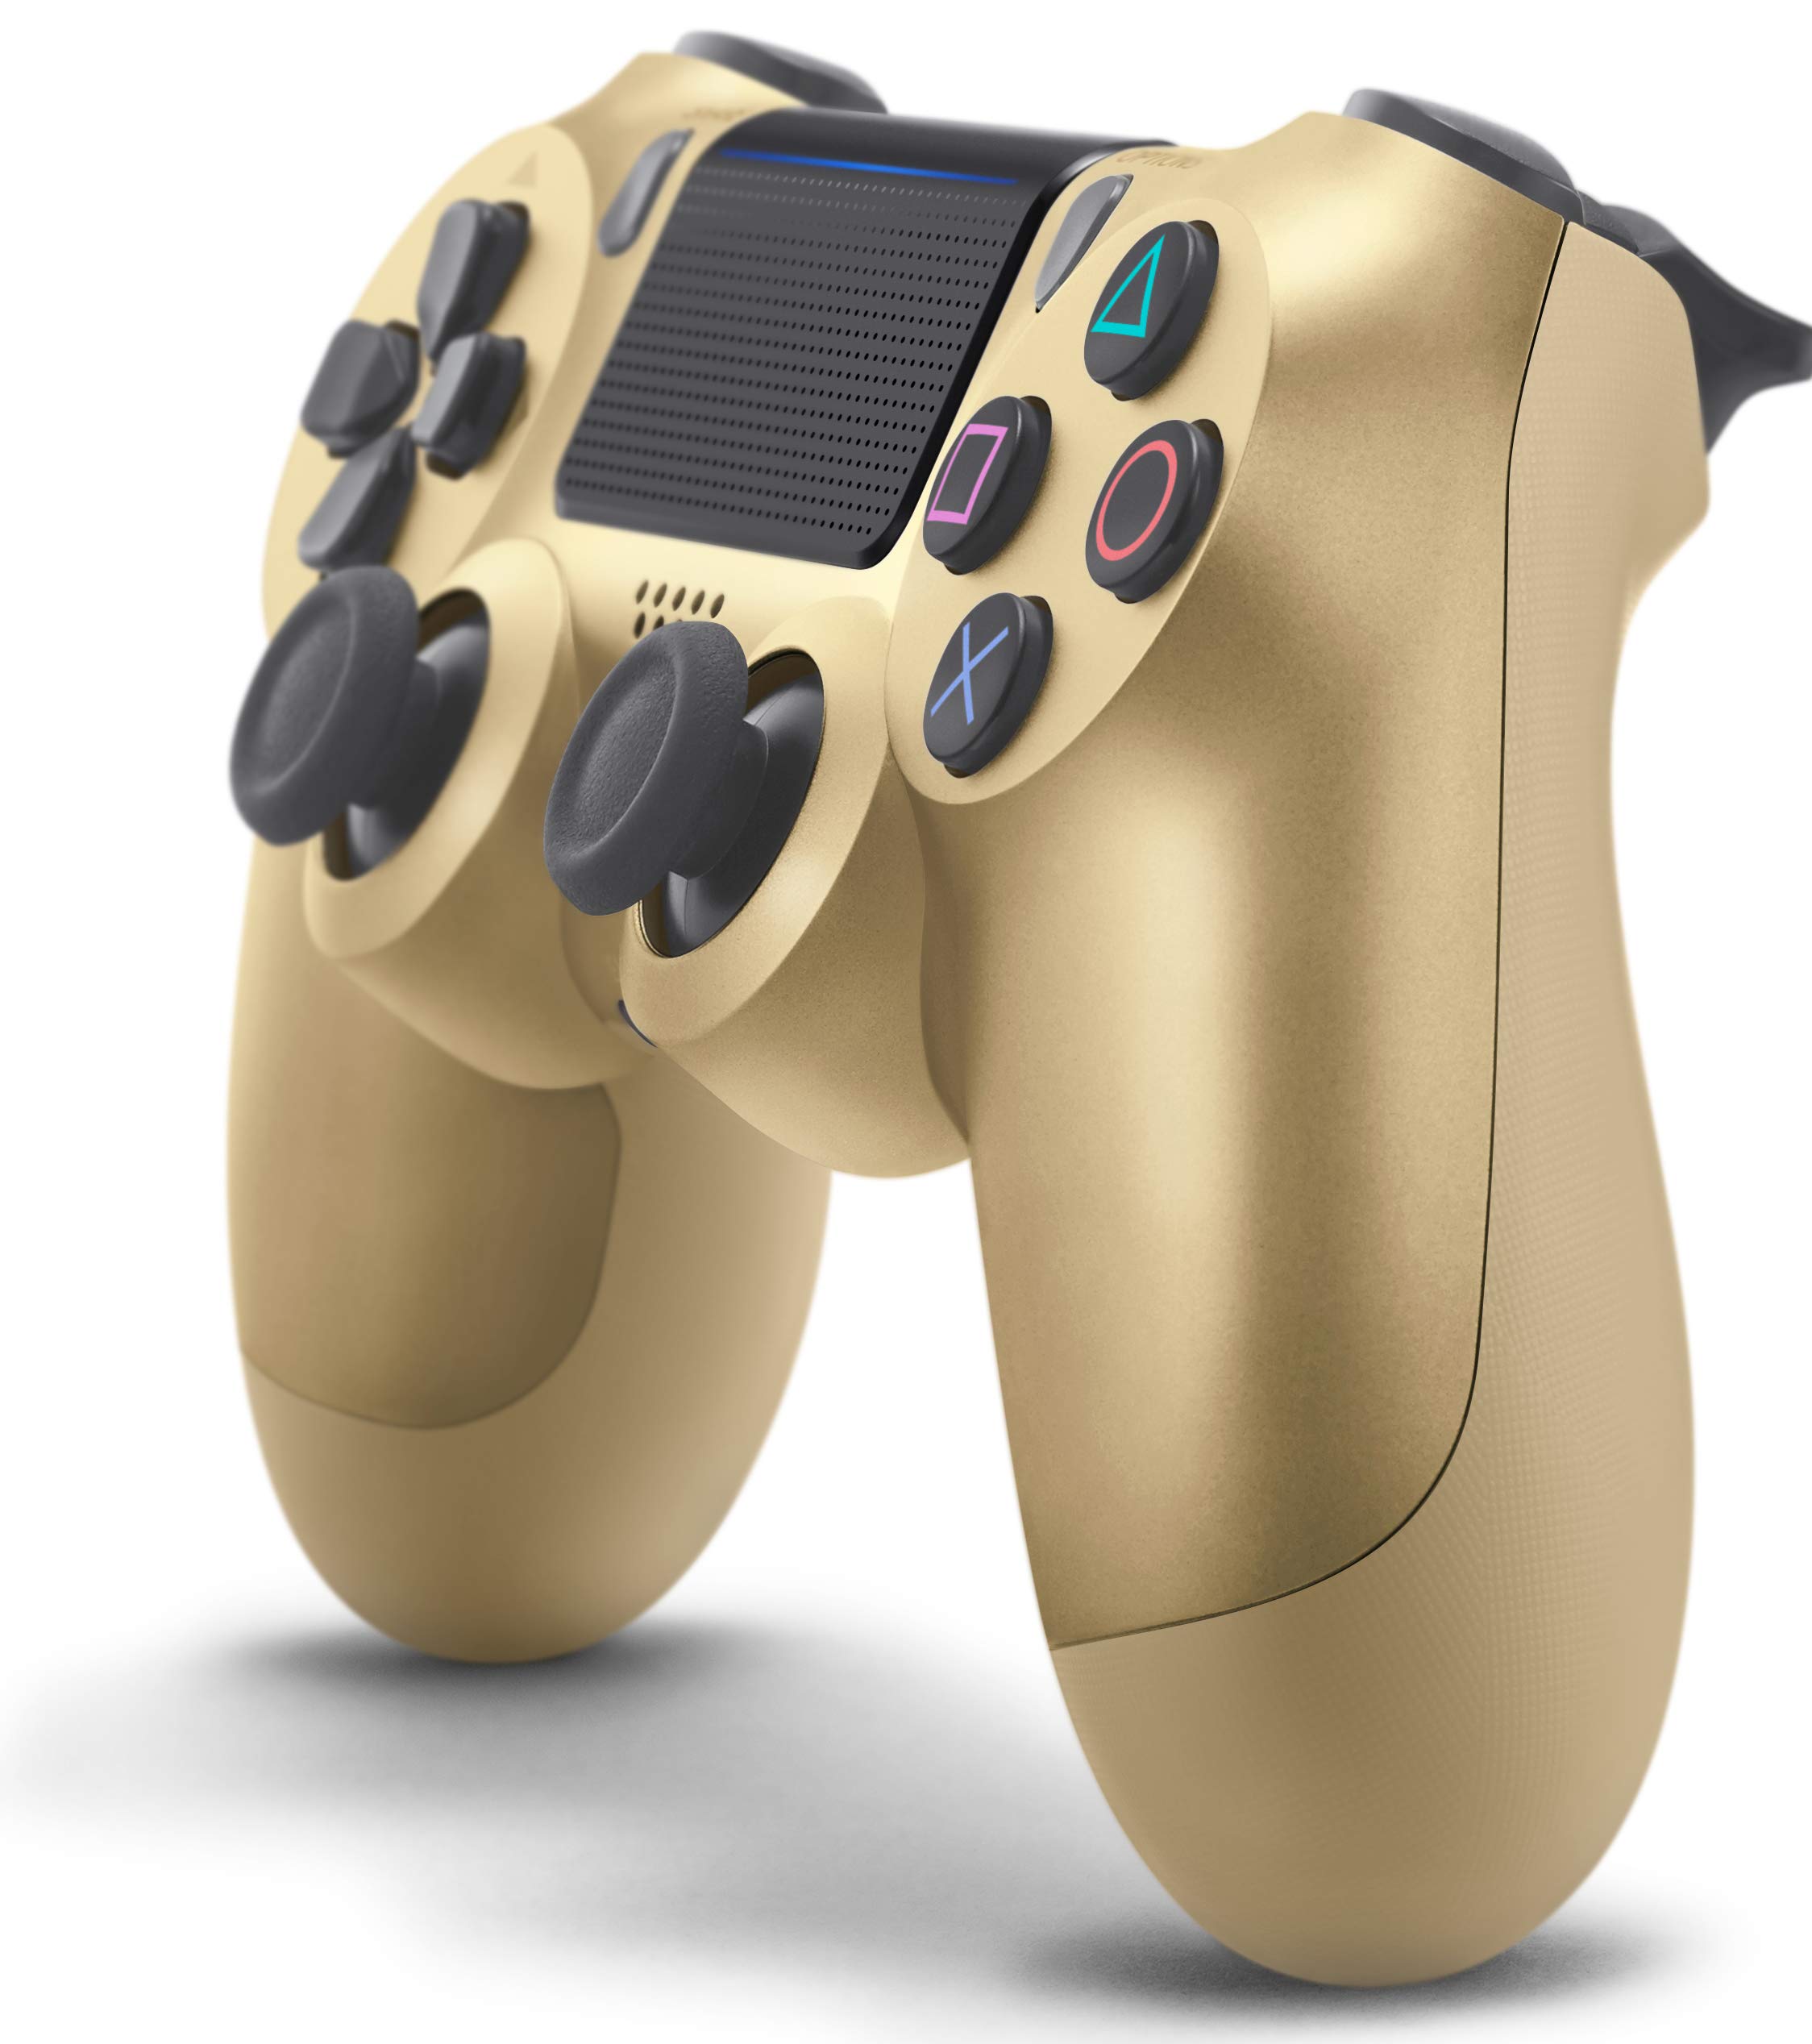 DualShock 4 Wireless Controller for PlayStation 4 - Gold